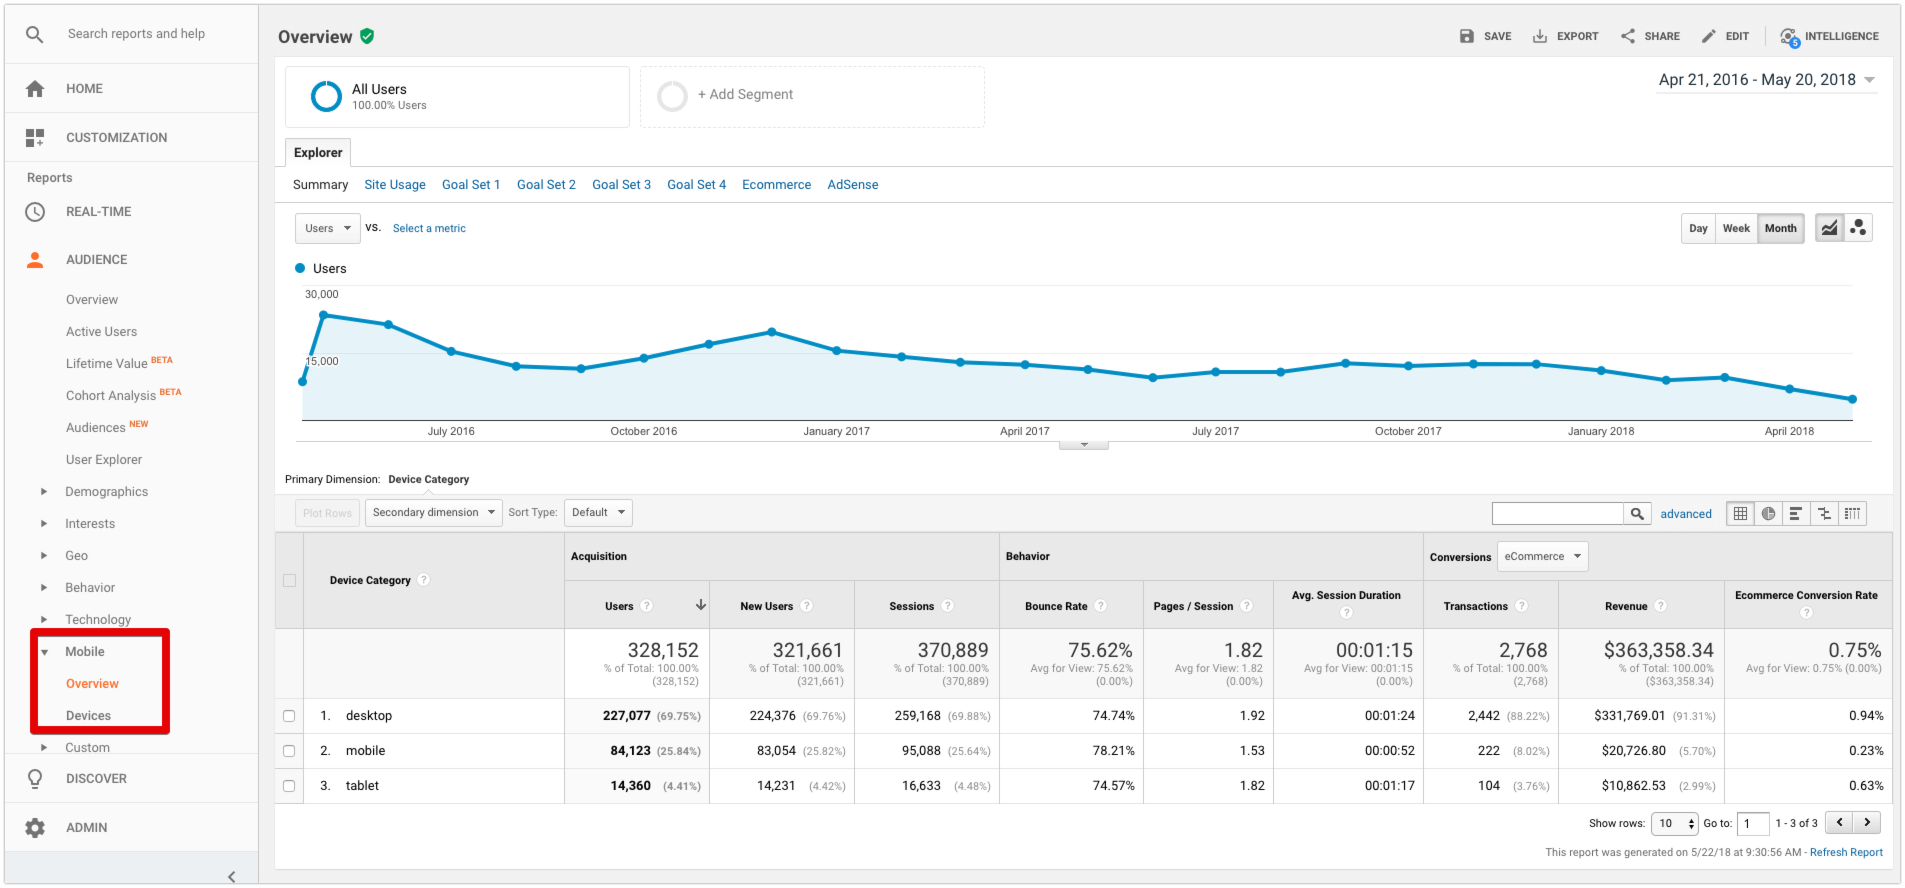 Mobile Overview Reports